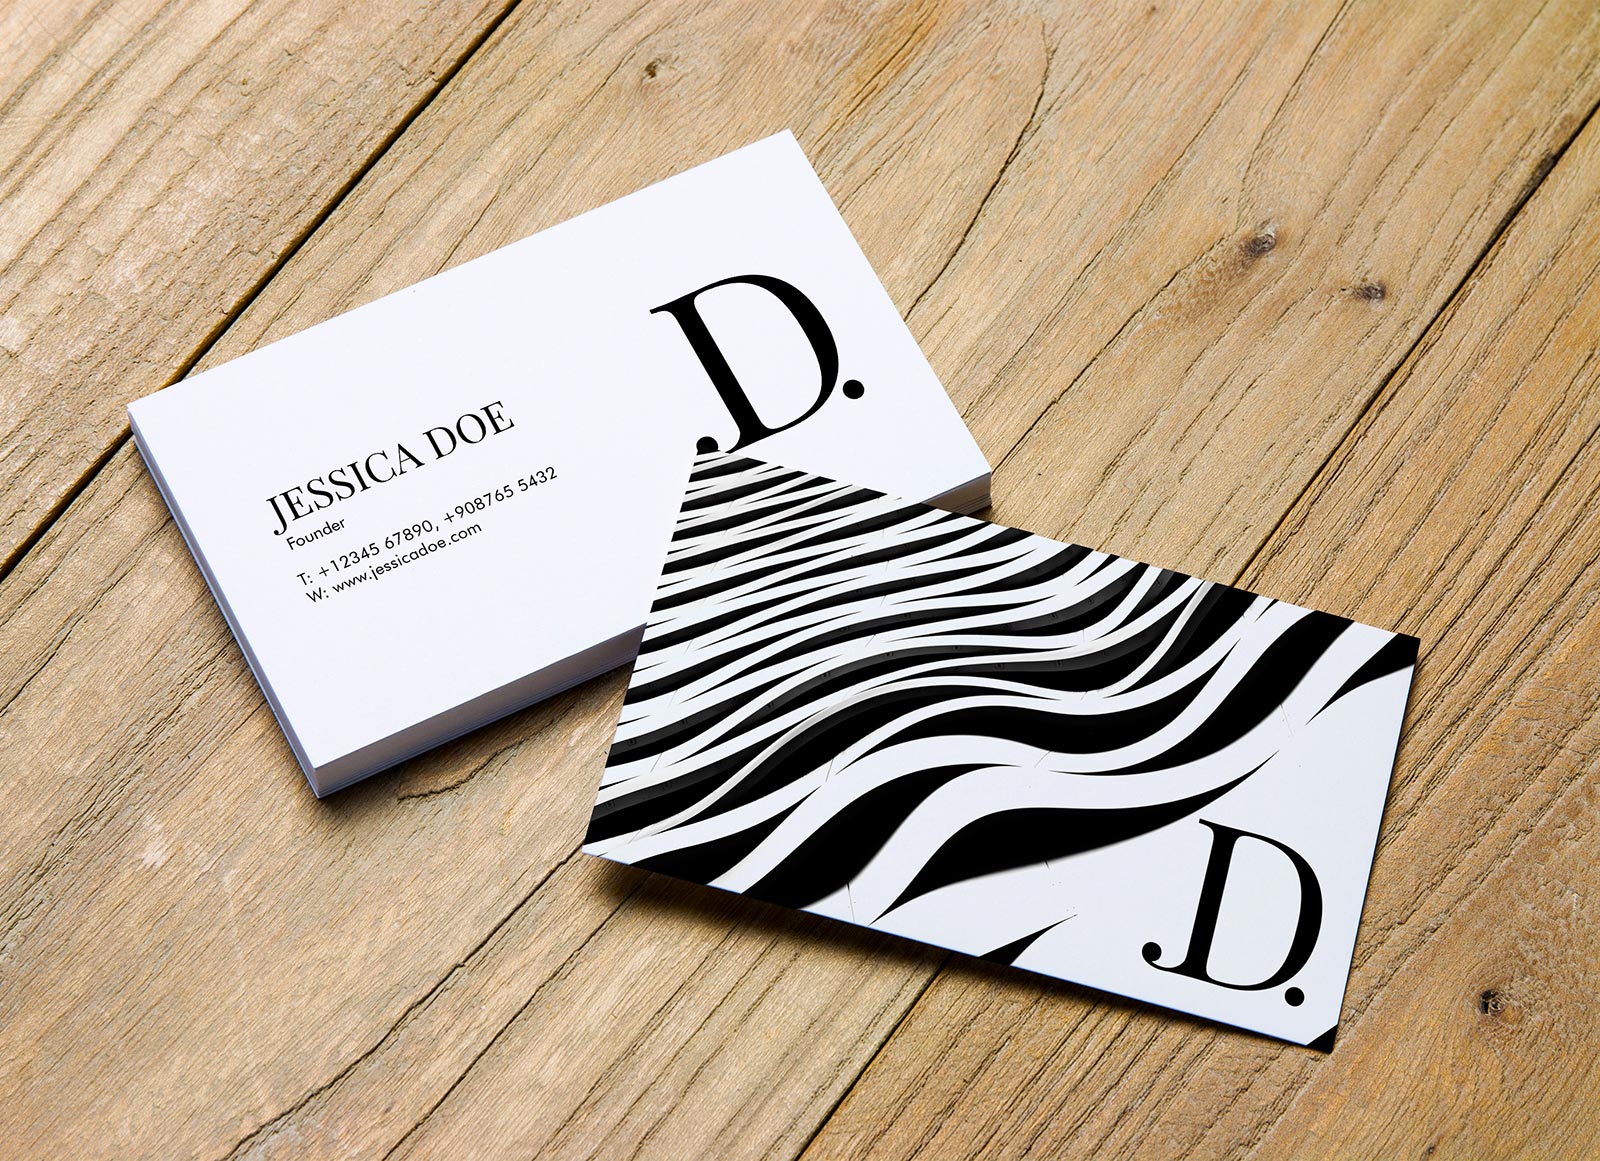 Download 2 Beautiful Single Double Sided Business Card Mockup Psd Files Good Mockups